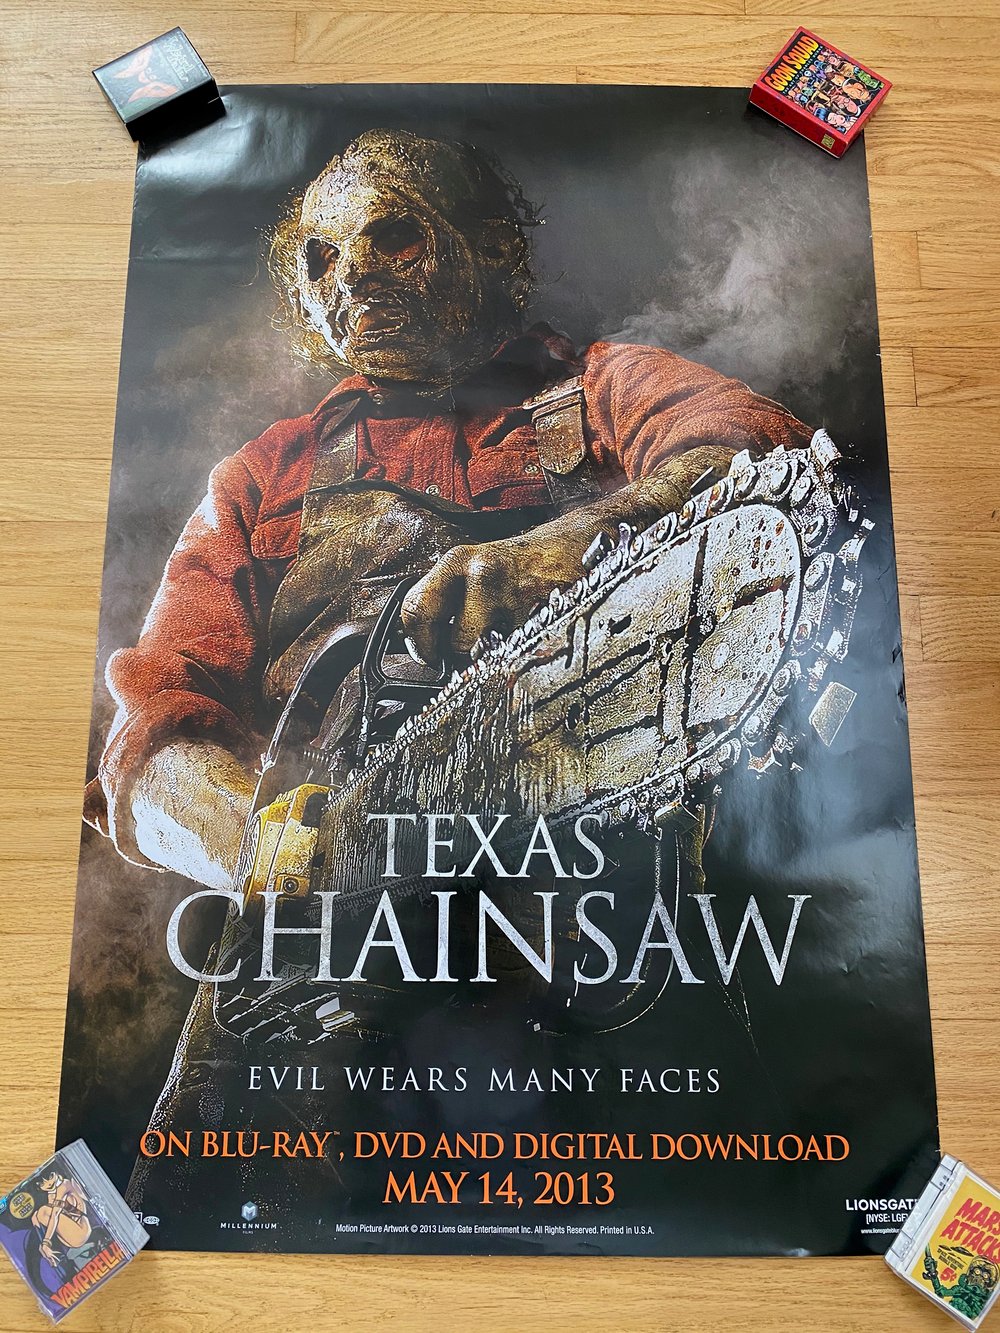 2013 TEXAS CHAINSAW Original Lionsgate Home Video Promotional Movie Poster